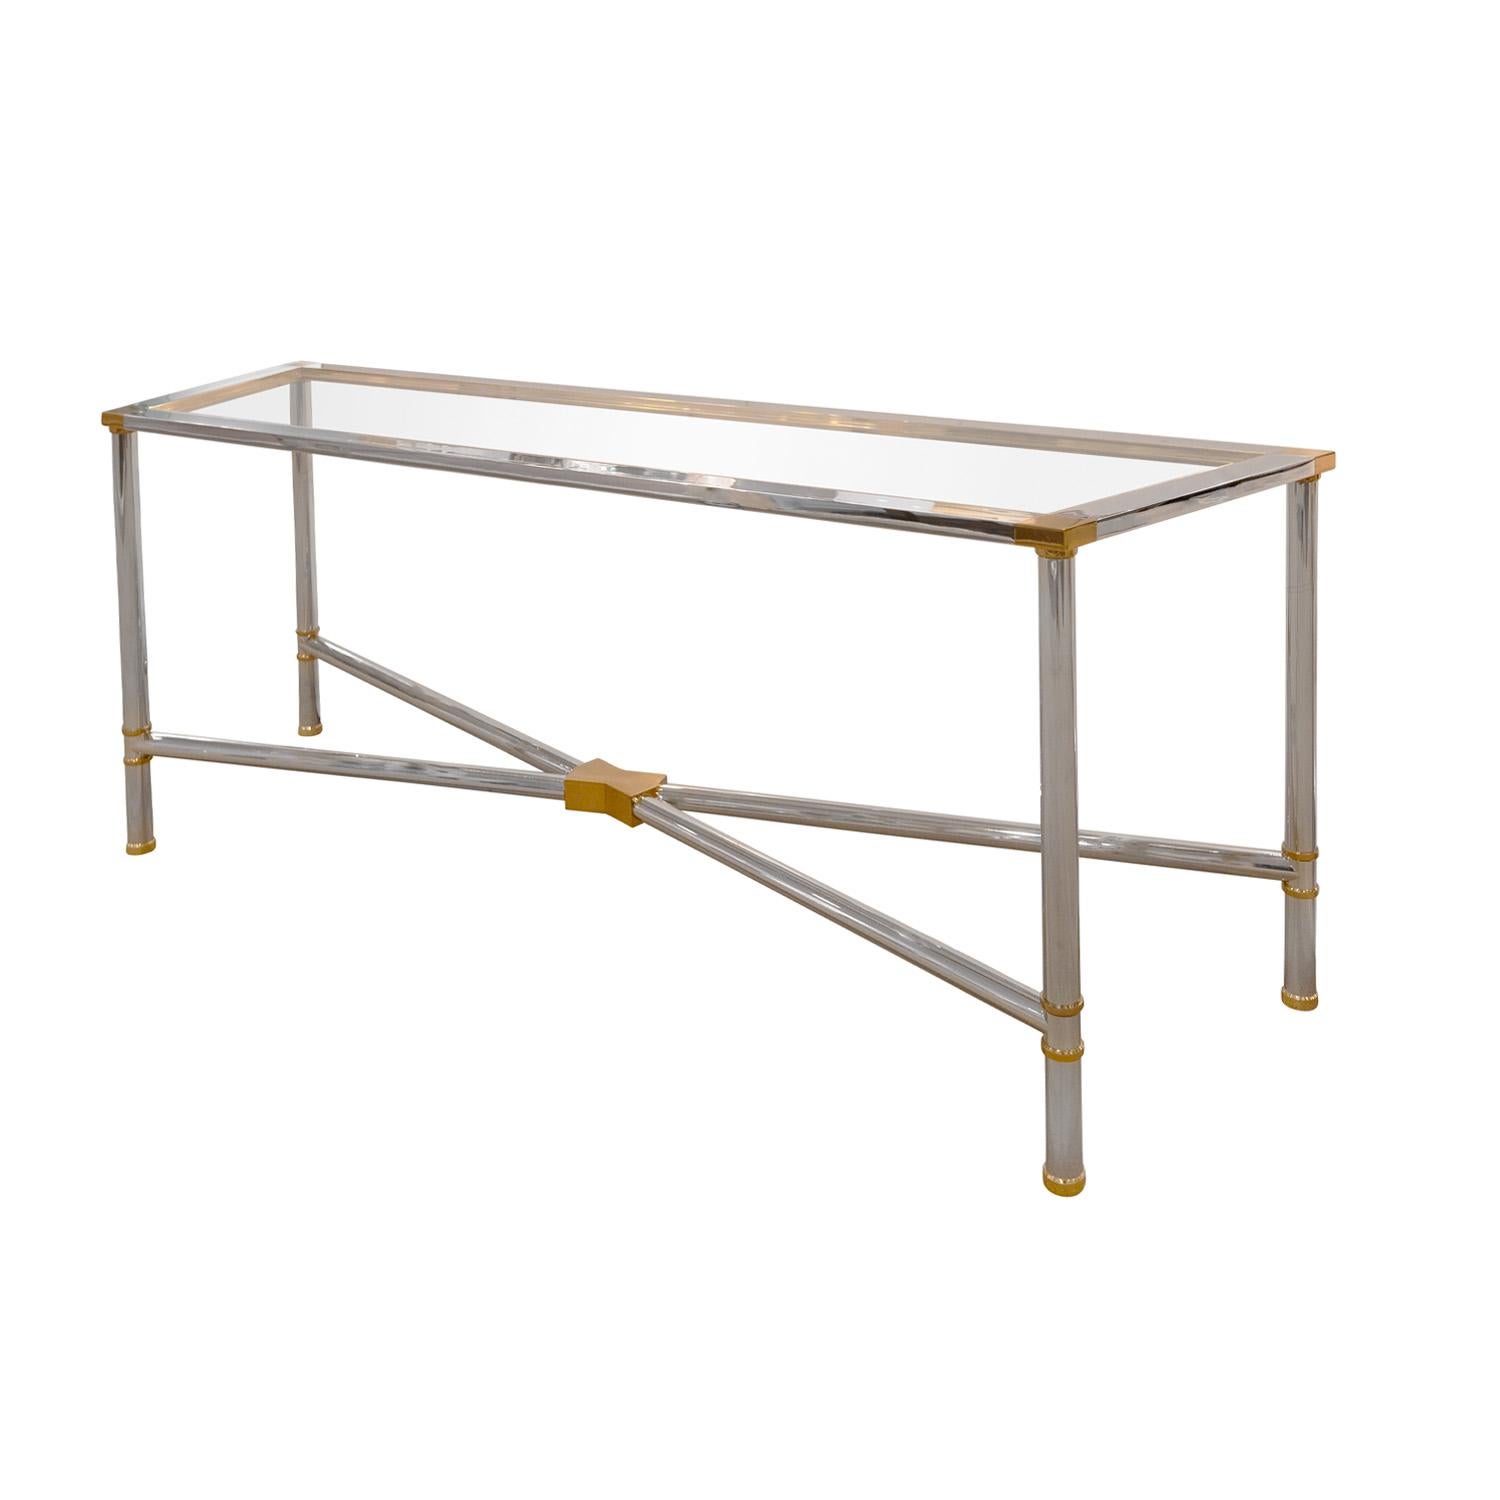 Modern Karl Springer Rare Jansen Style Console Table in Polished Chrome and Brass 1980s For Sale